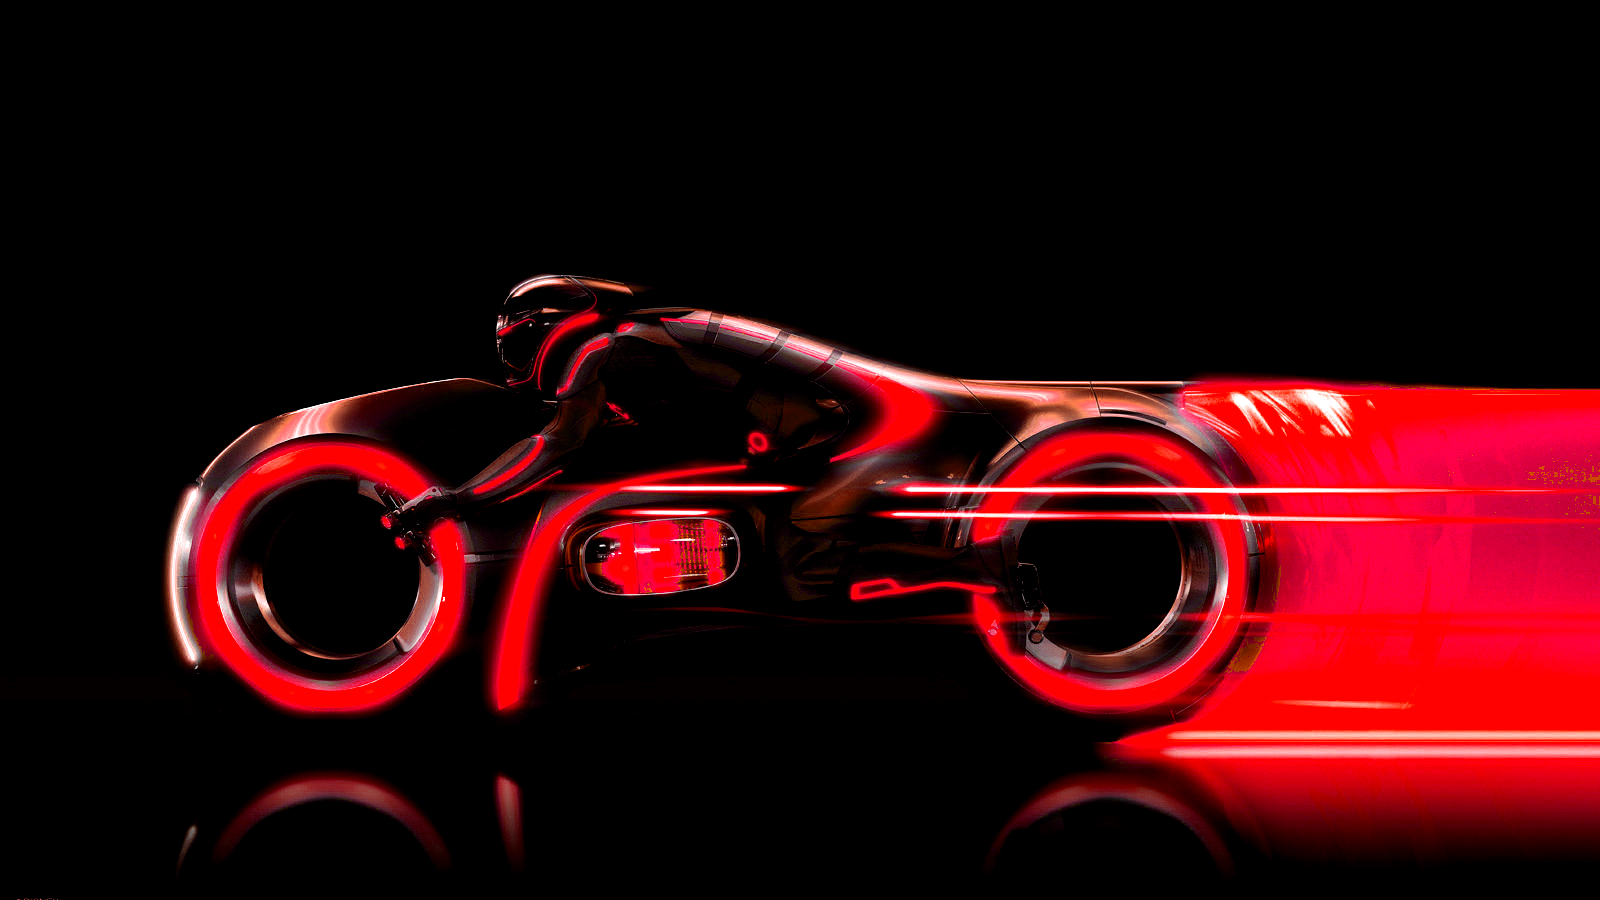 Download mobile wallpaper Tron, Movie, Tron: Legacy for free.